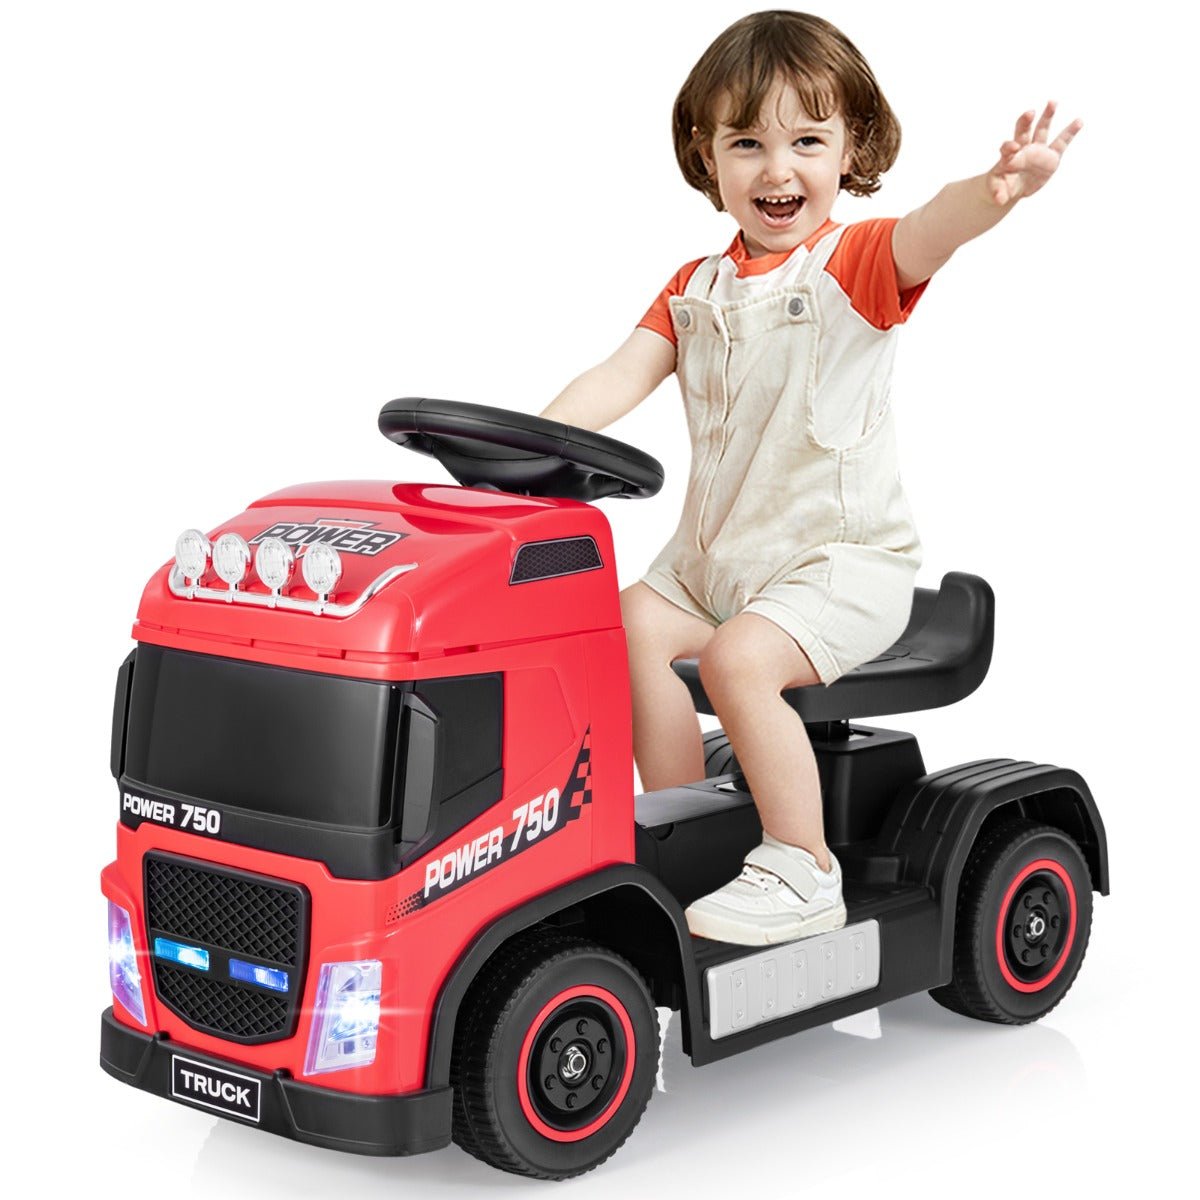 Exciting Red Push Truck with Sounds